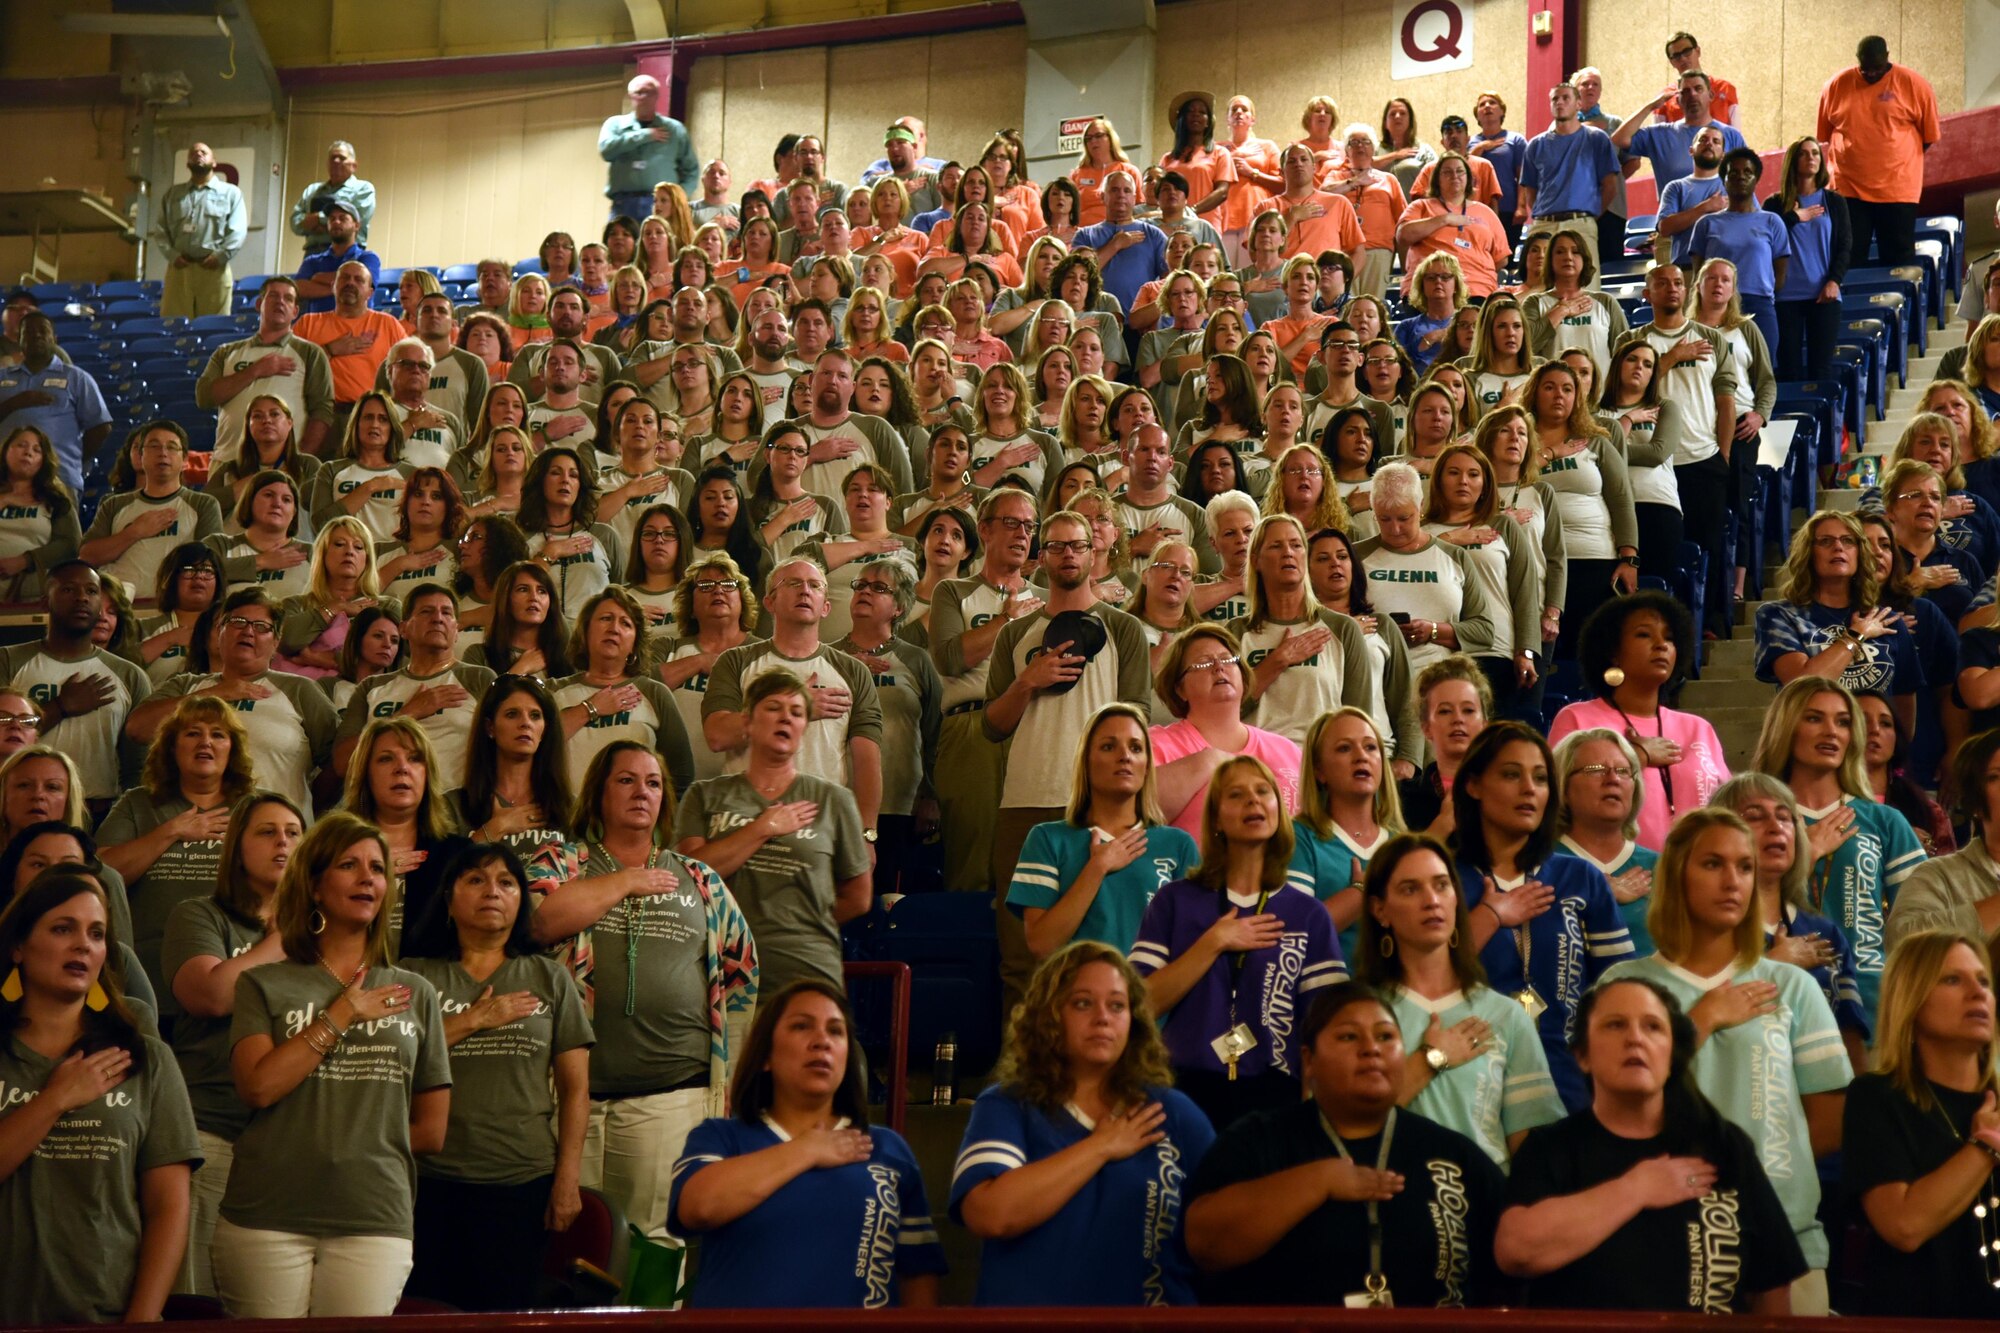 Faculty and staff from the San Angelo Independent School District recite the Pledge of Allegiance at the annual convocation signifying the kickoff of the 2017-2018 school year at the Foster Communications Colosseum, San Angelo, Texas, Aug. 15, 2017.